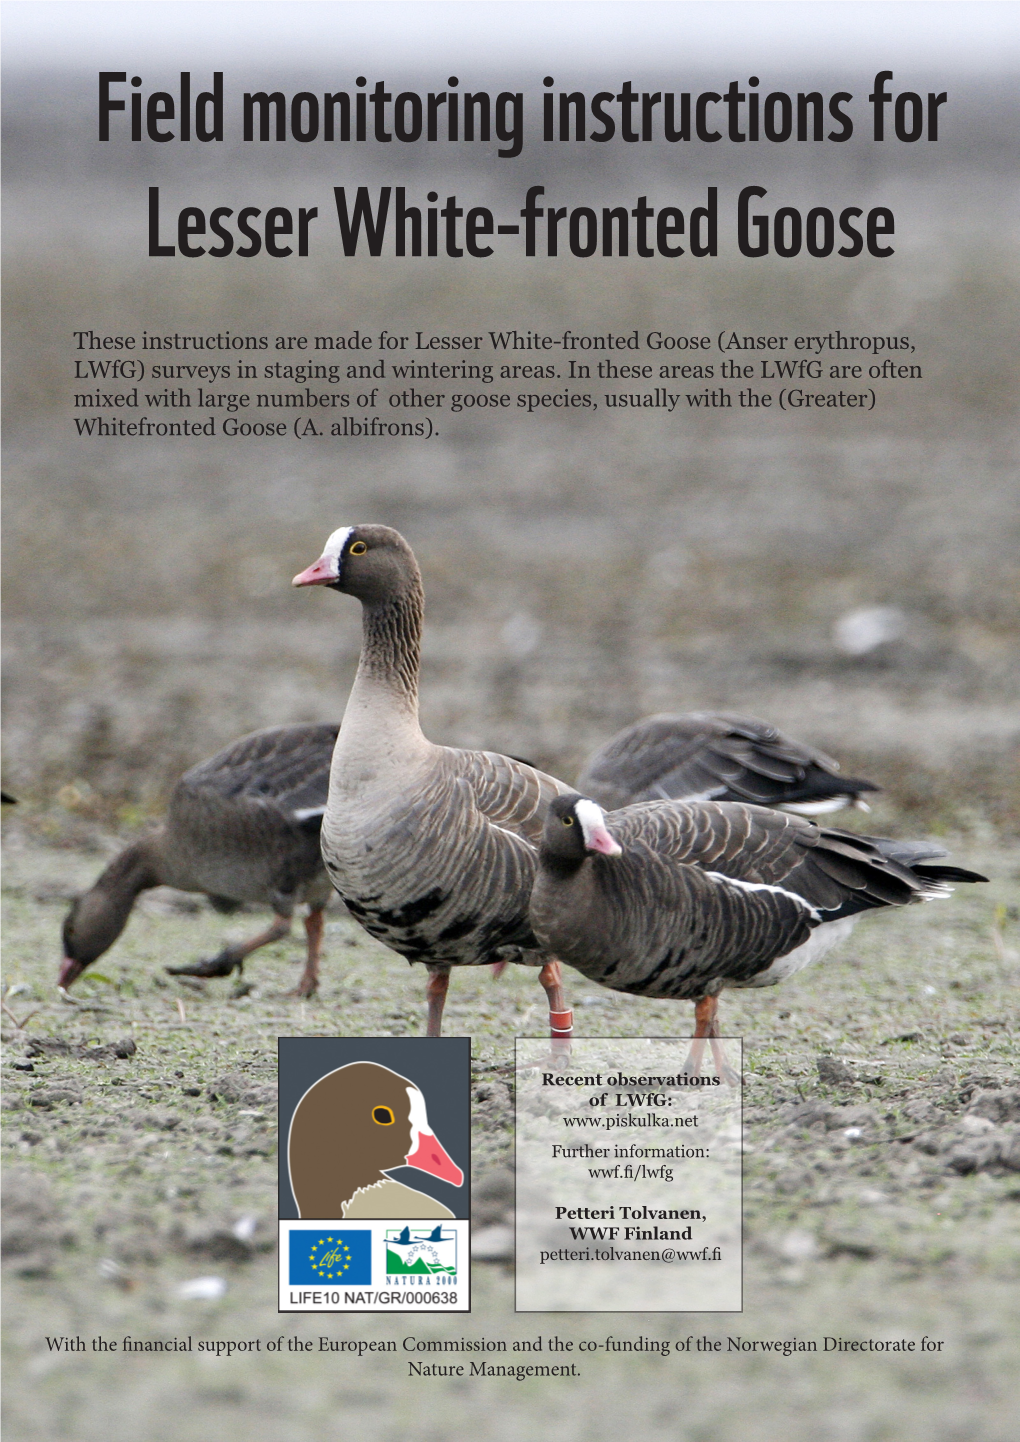 Field Monitoring Instructions for Lesser White-Fronted Goose